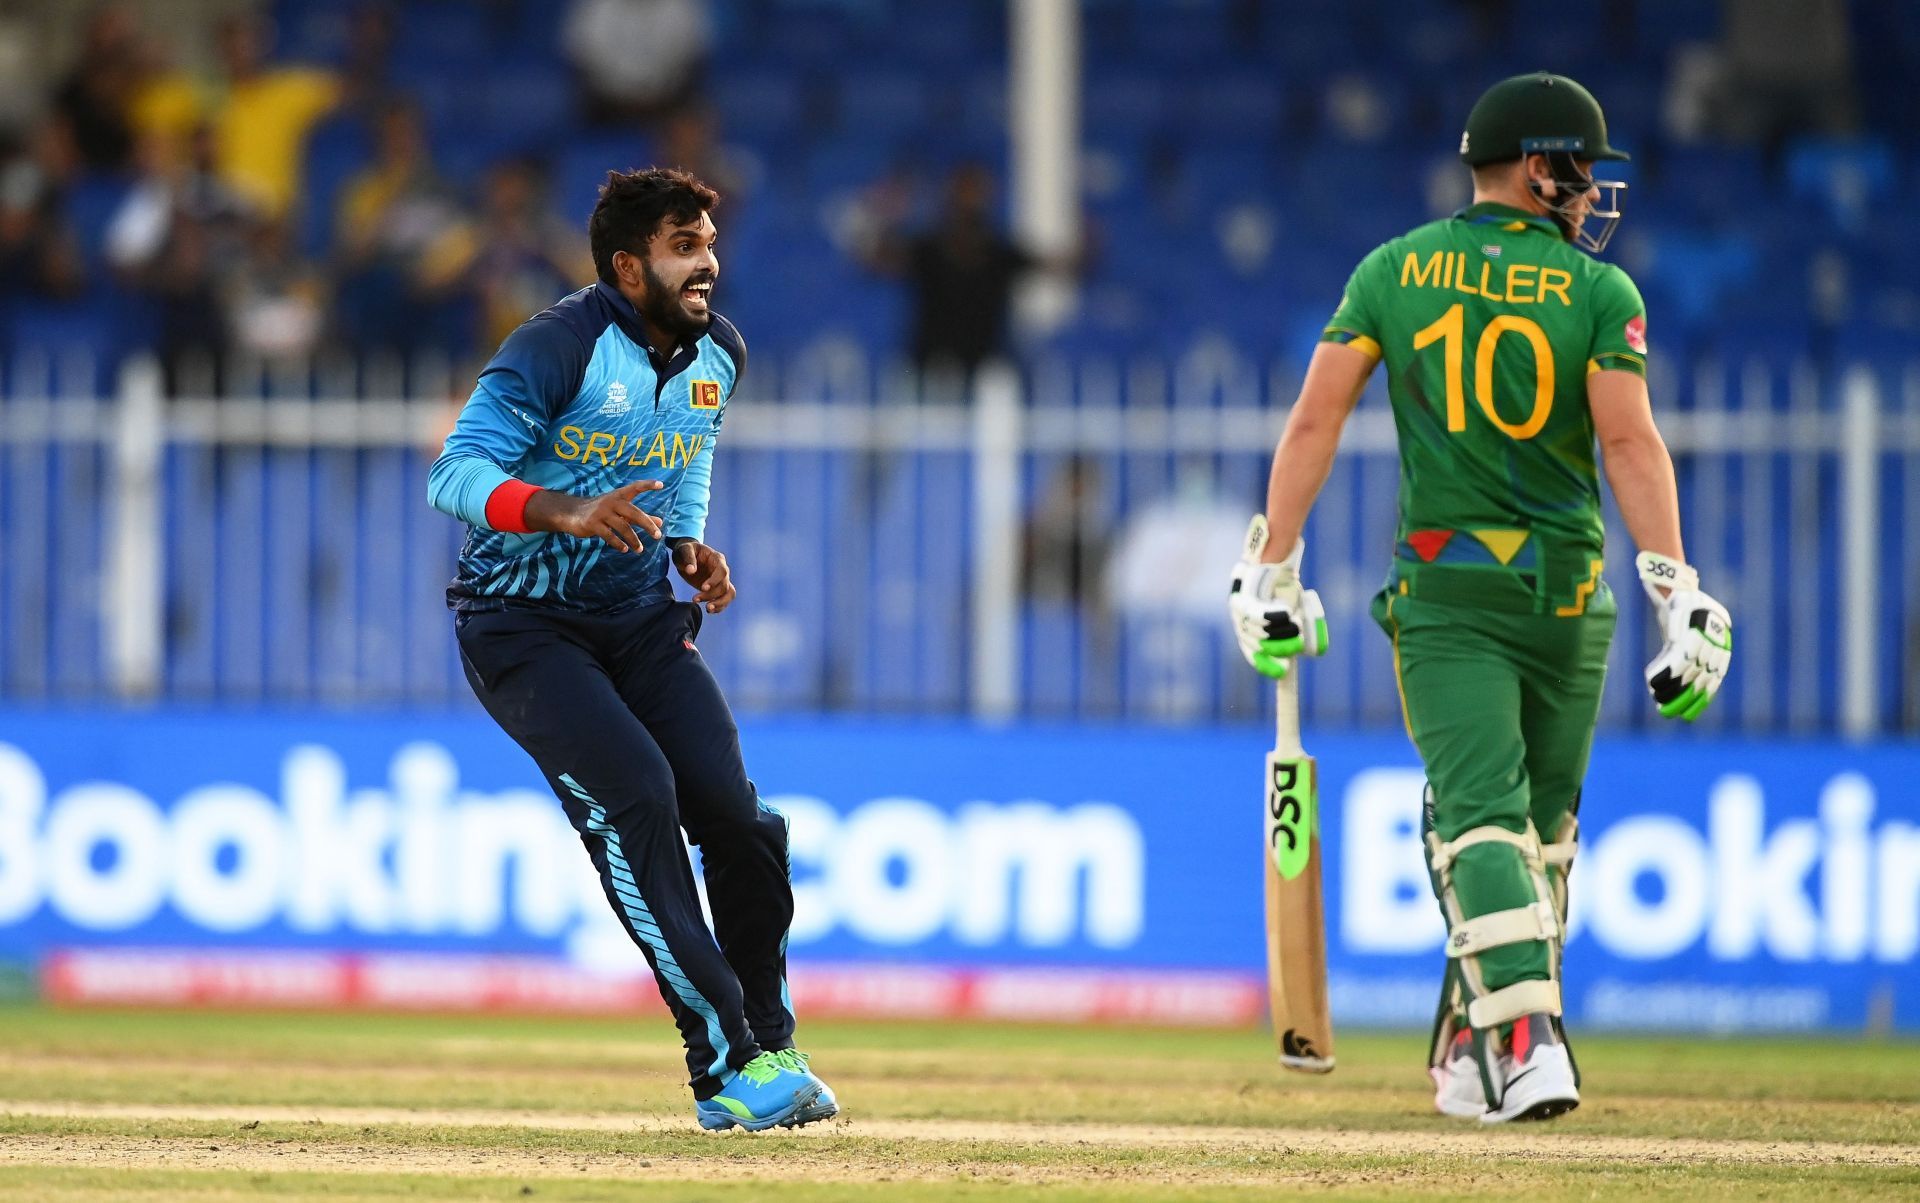 The Sri Lanka leggie took a hat-trick against South Africa in the 2021 T20 World Cup.